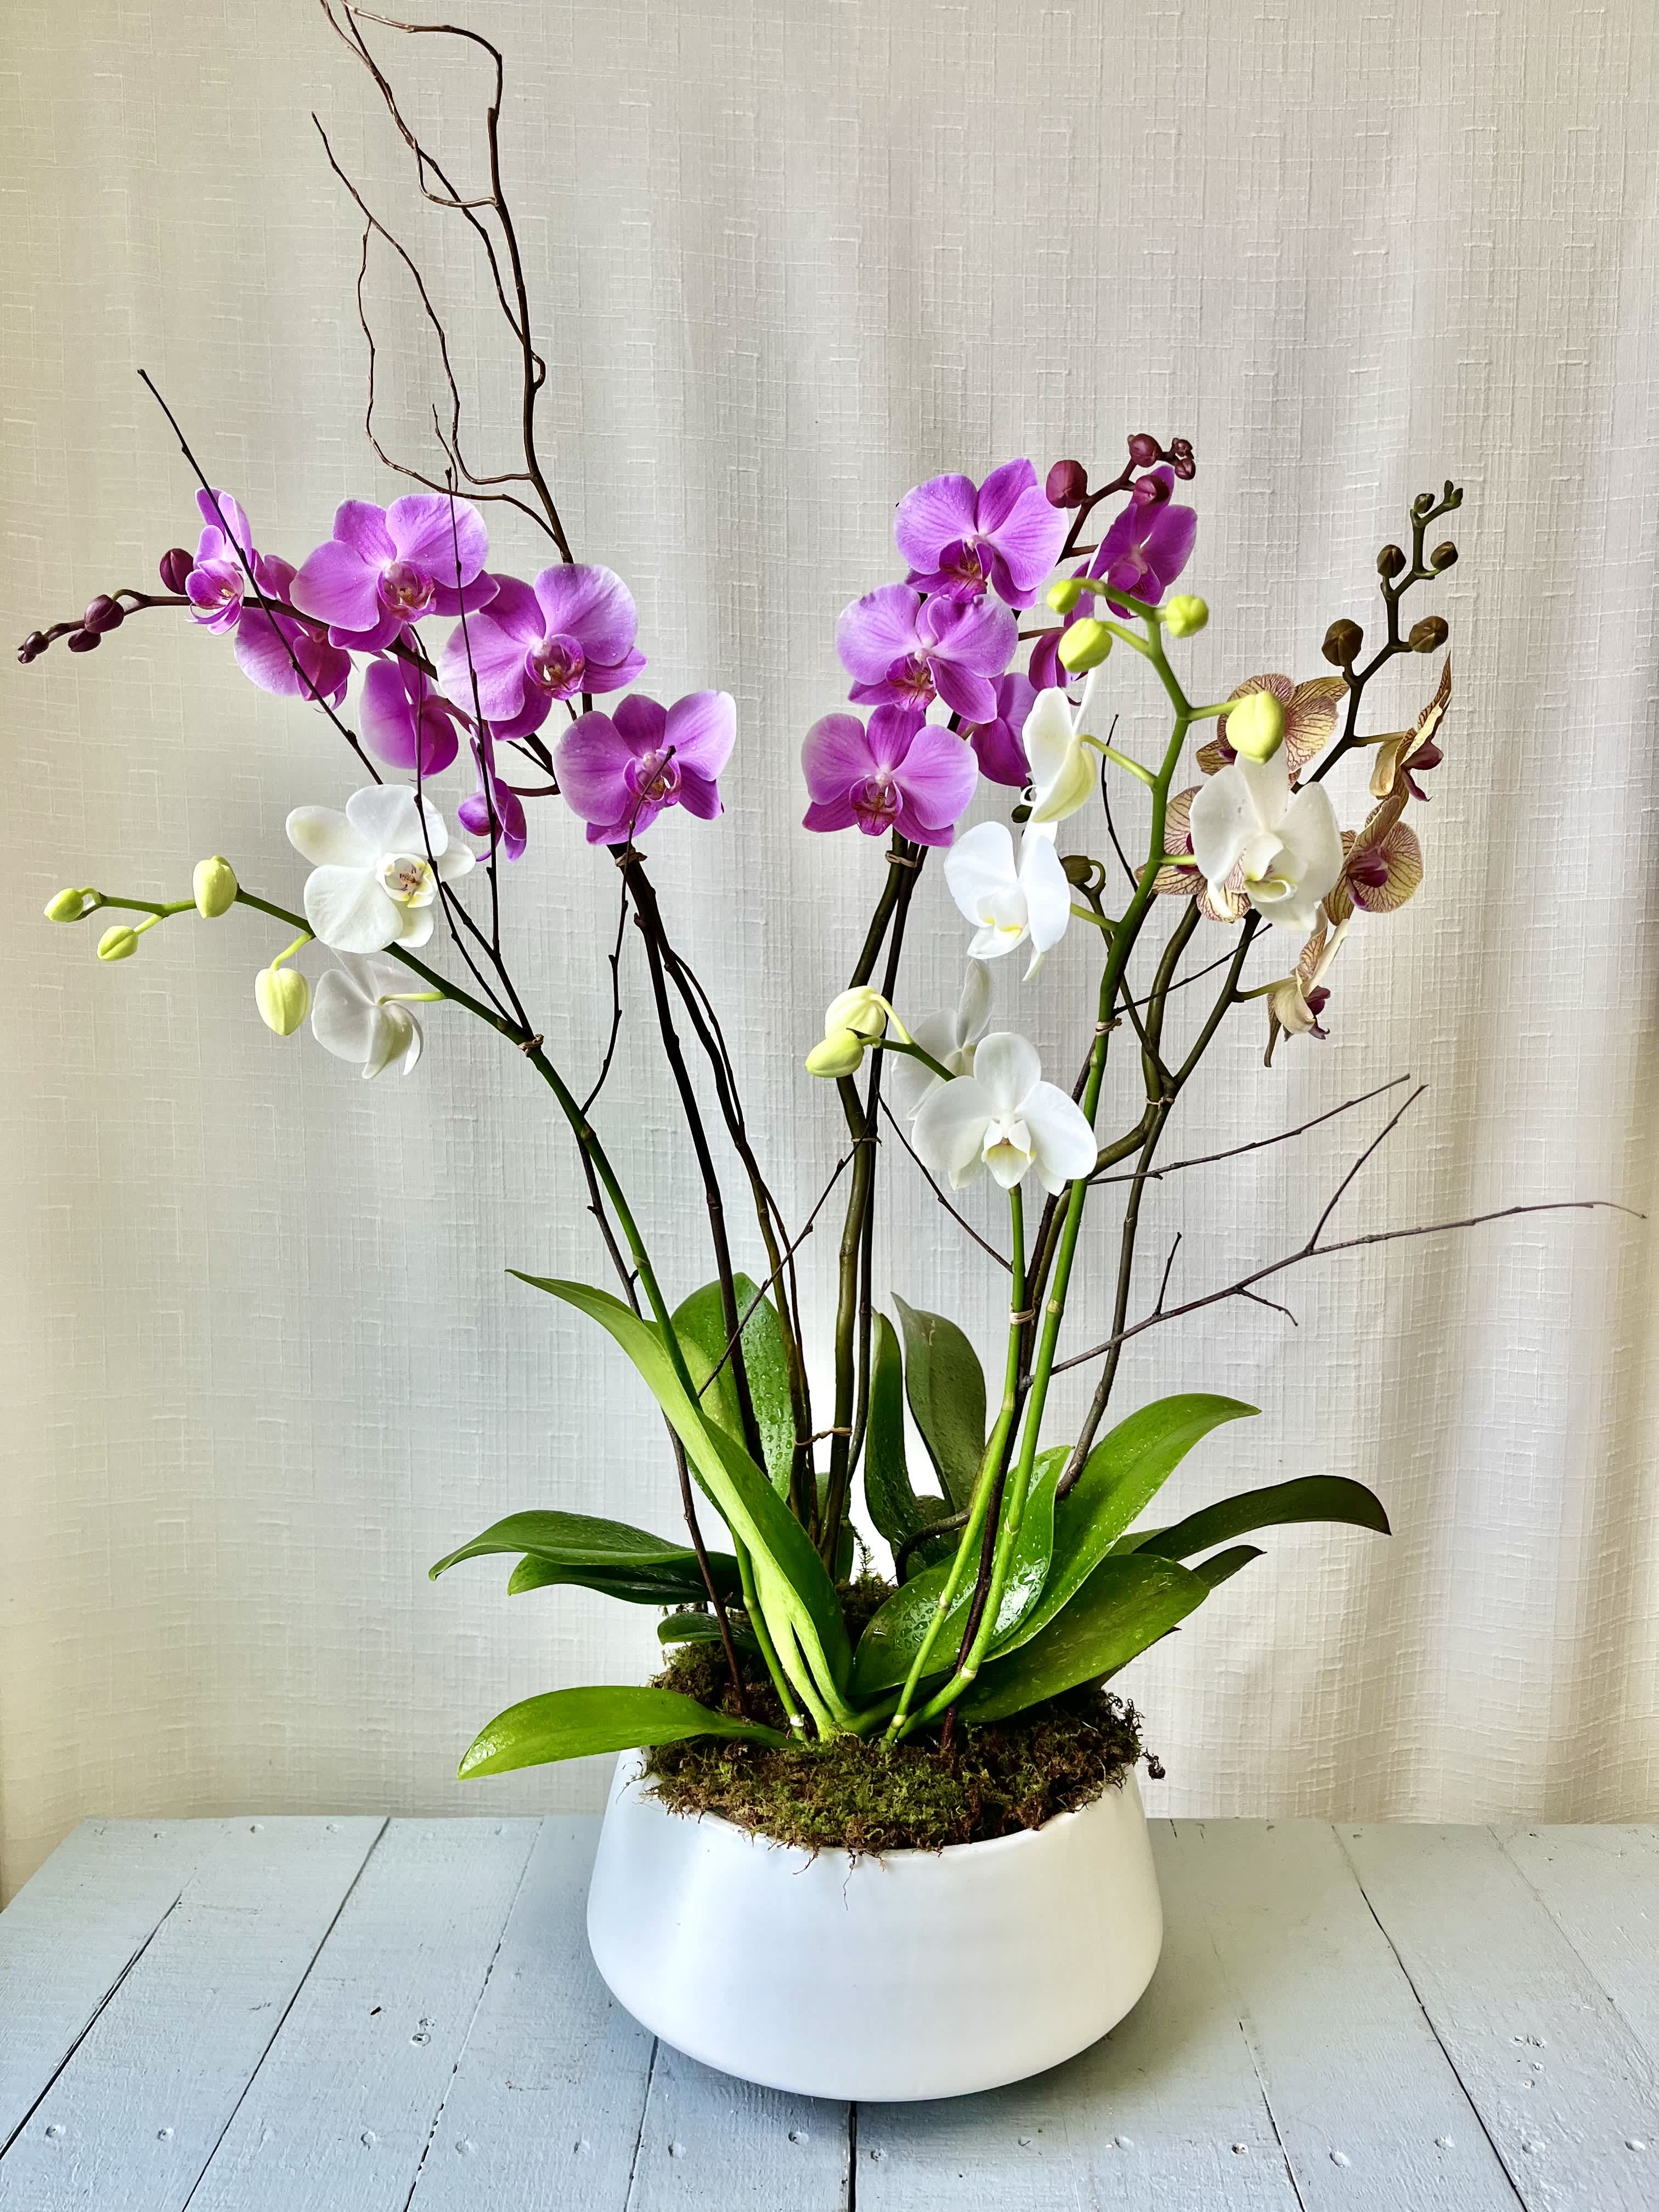 Triple Crown Orchid - An elegant display of orchids, includes 3 orchid plants, each with a minimum of 2 stalks, in a modern ceramic vase.